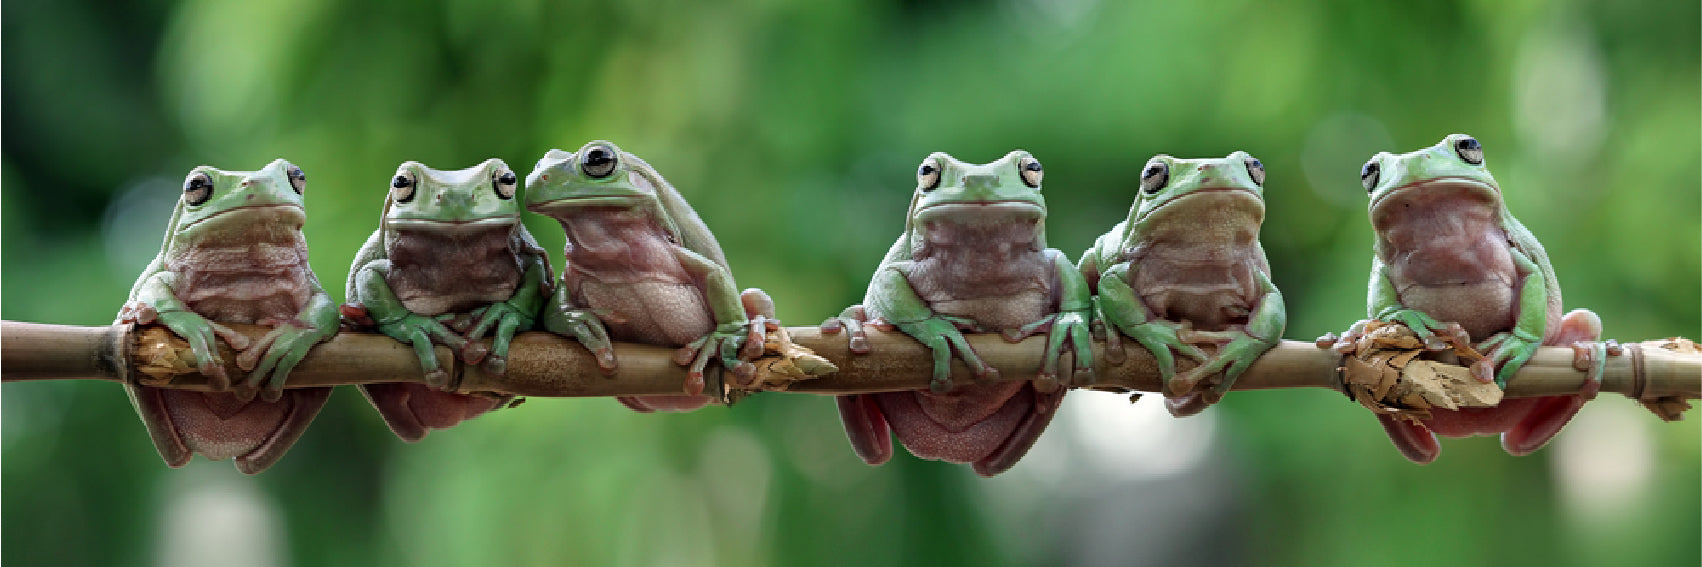 Panoramic Canvas Frogs Hanging on a Tree Branch Photograph High Quality 100% Australian Made Wall Canvas Print Ready to Hang